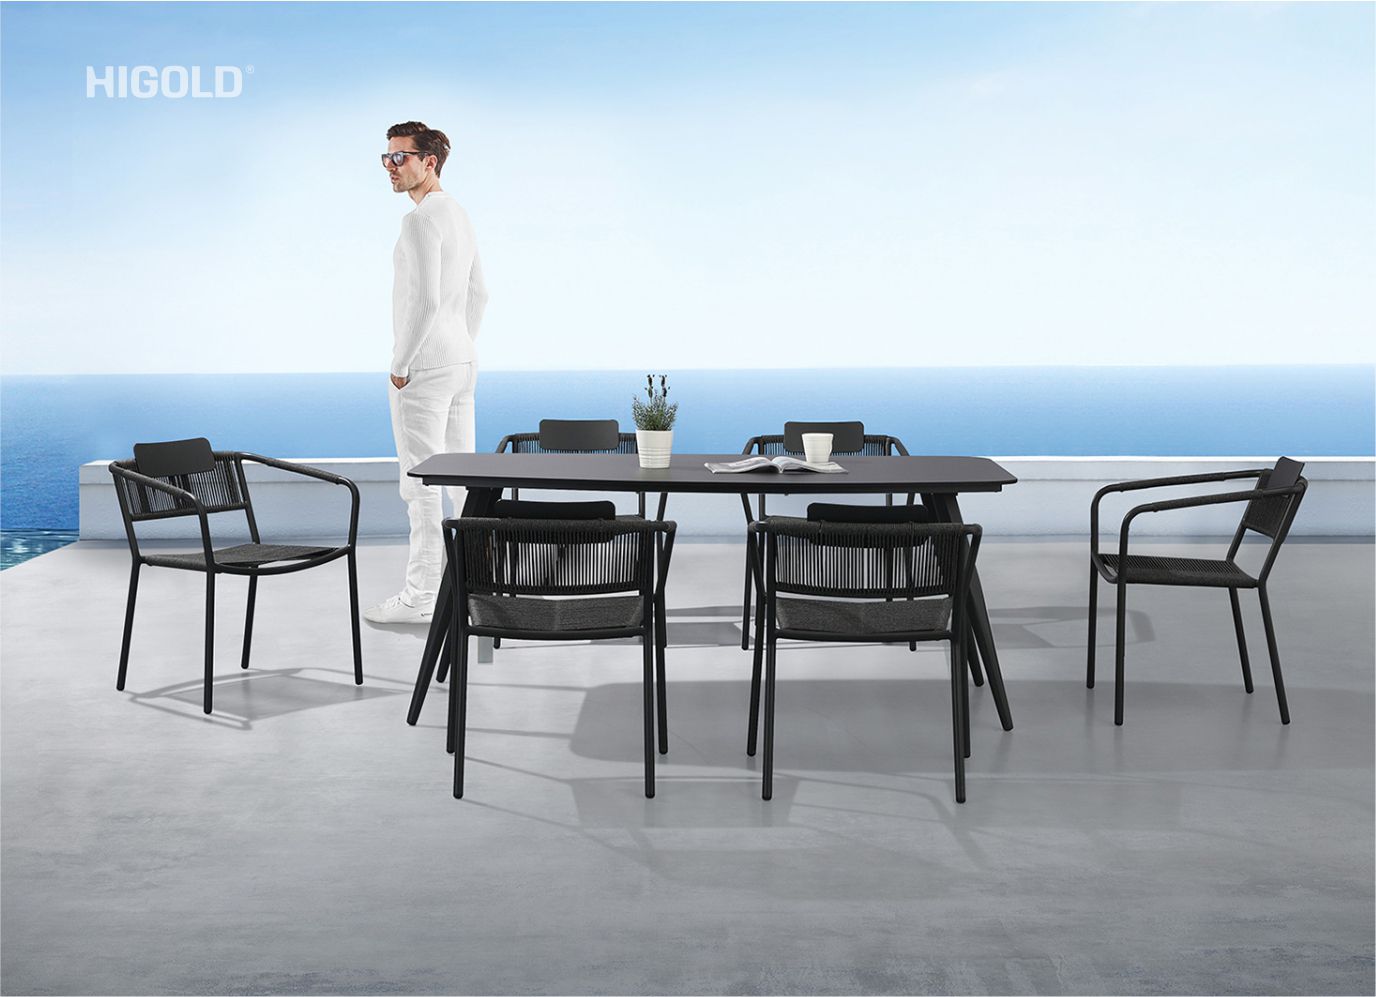 Kiwi outdoor dining set for 4